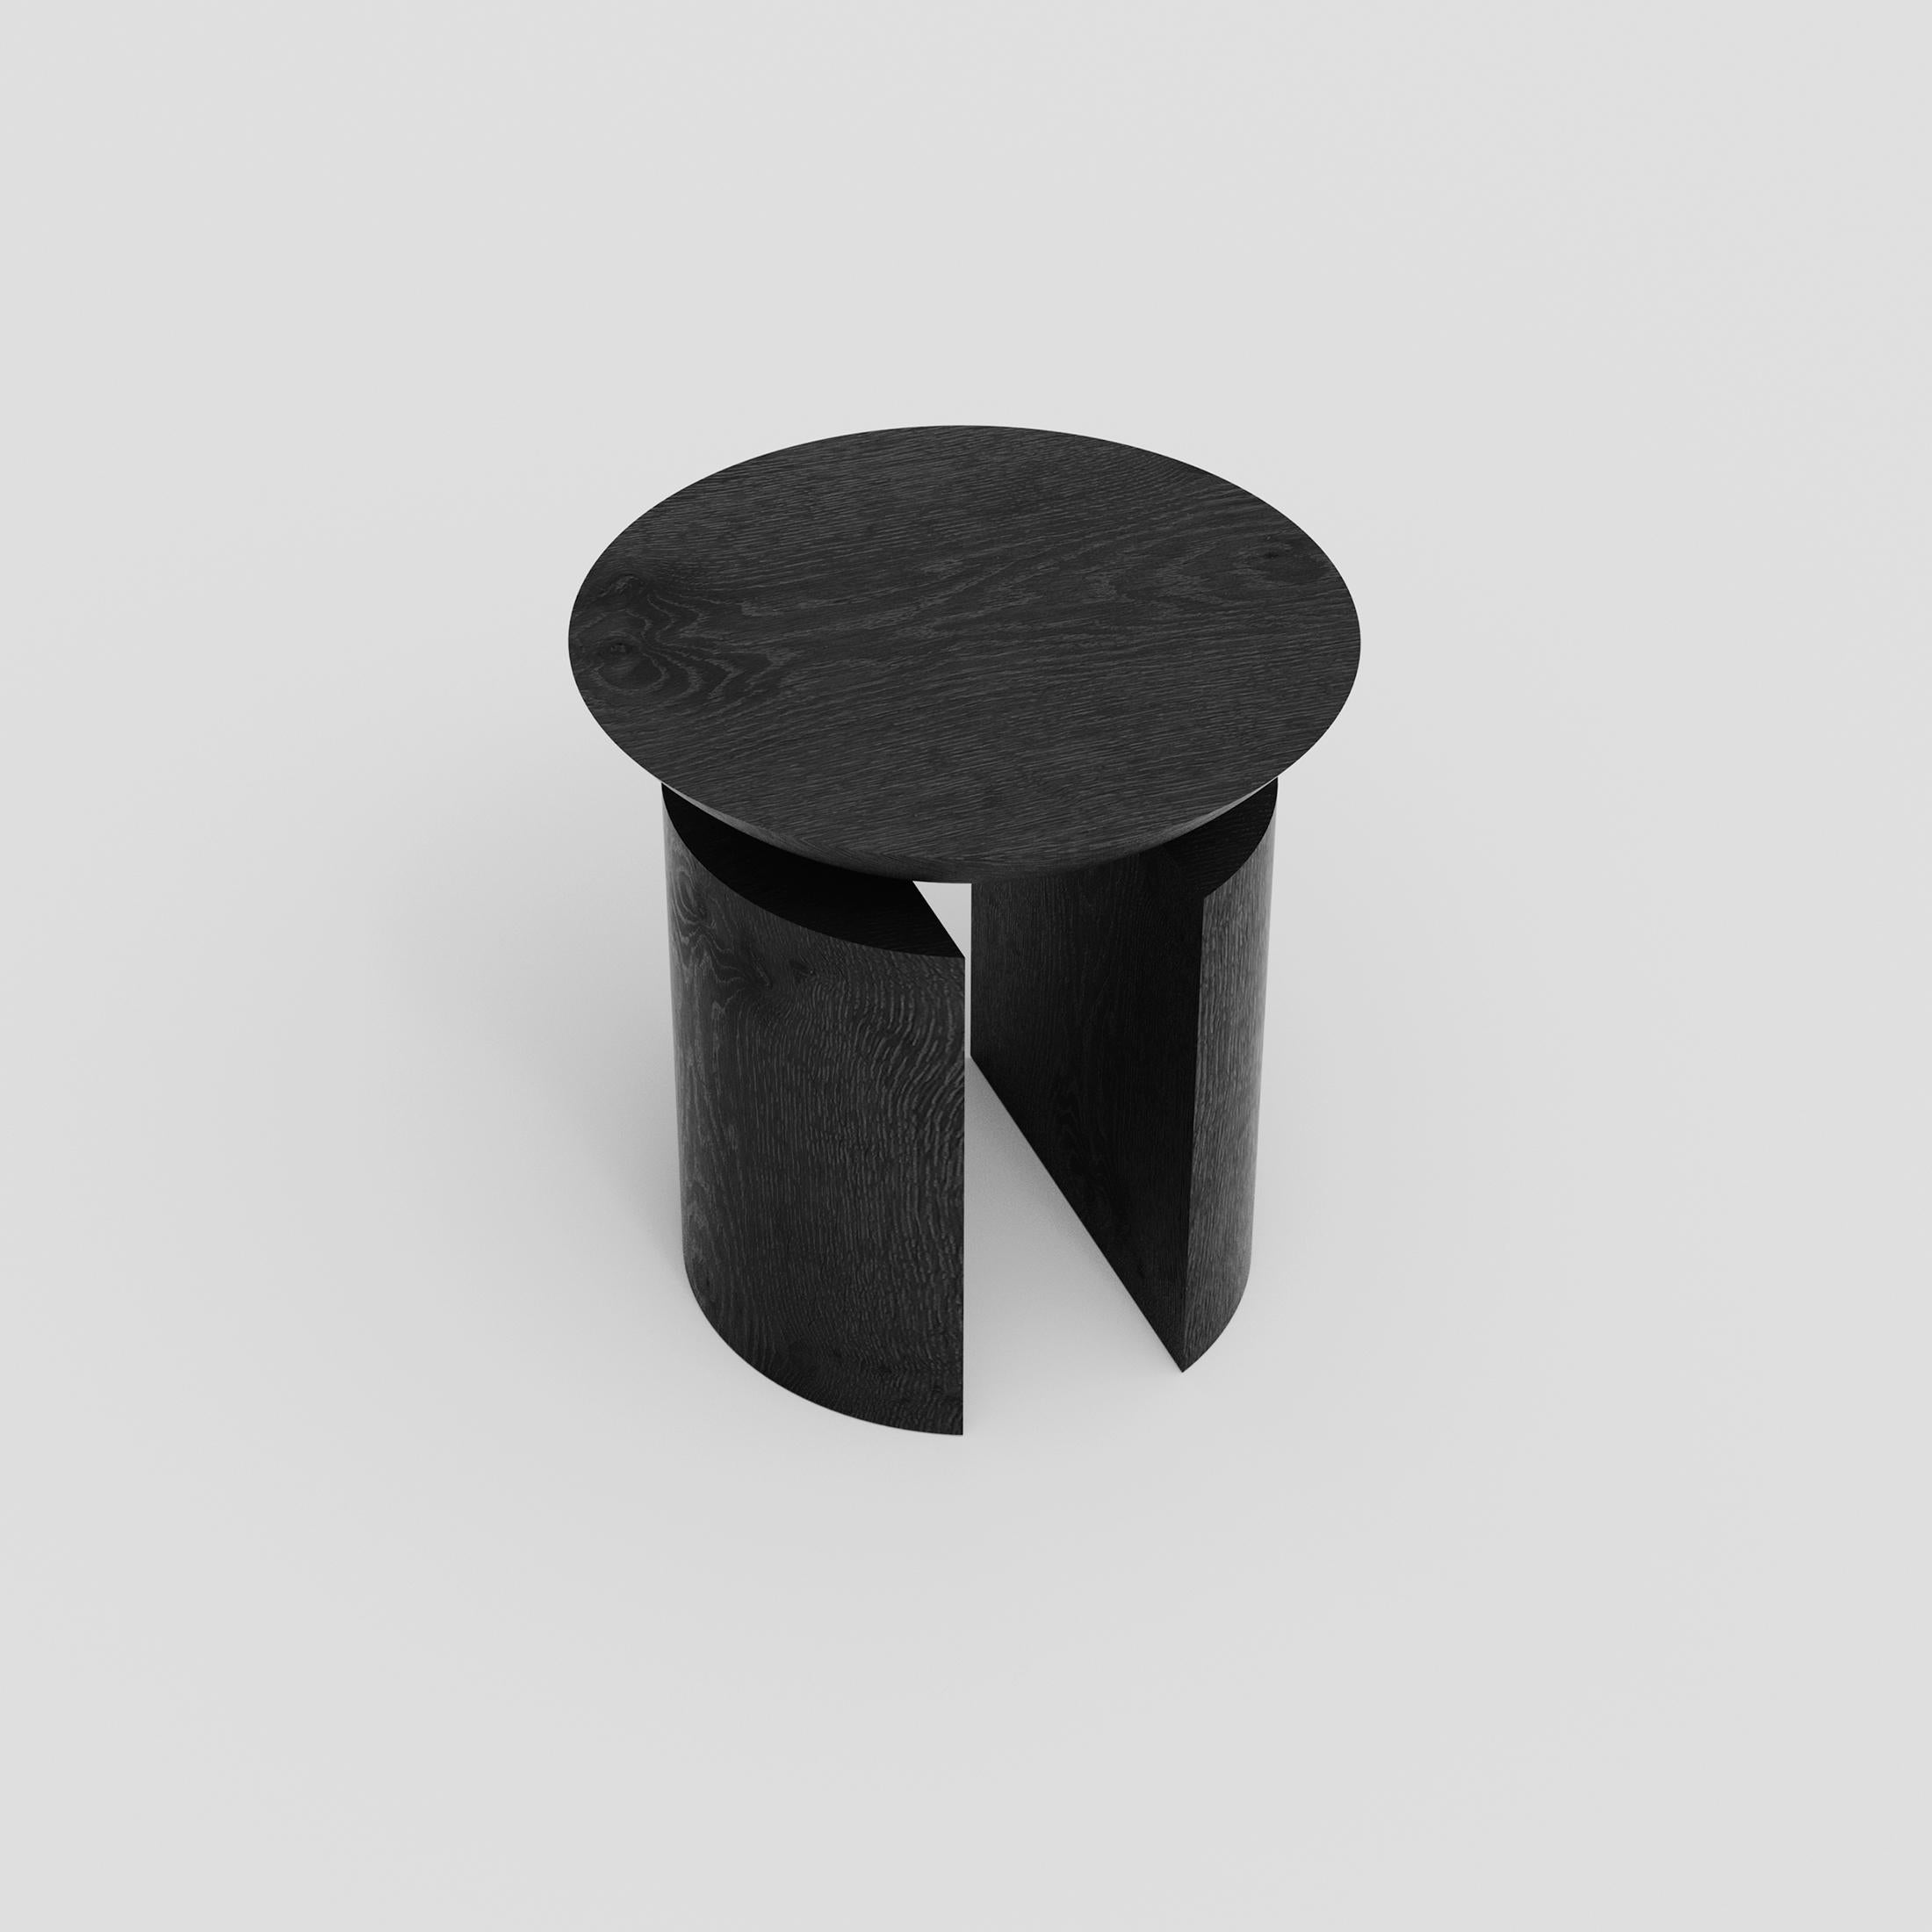 Hand-Crafted Anca Larga Sculptural Side Table/Stool Tropical Hardwood by Pedro Paulo Venzon